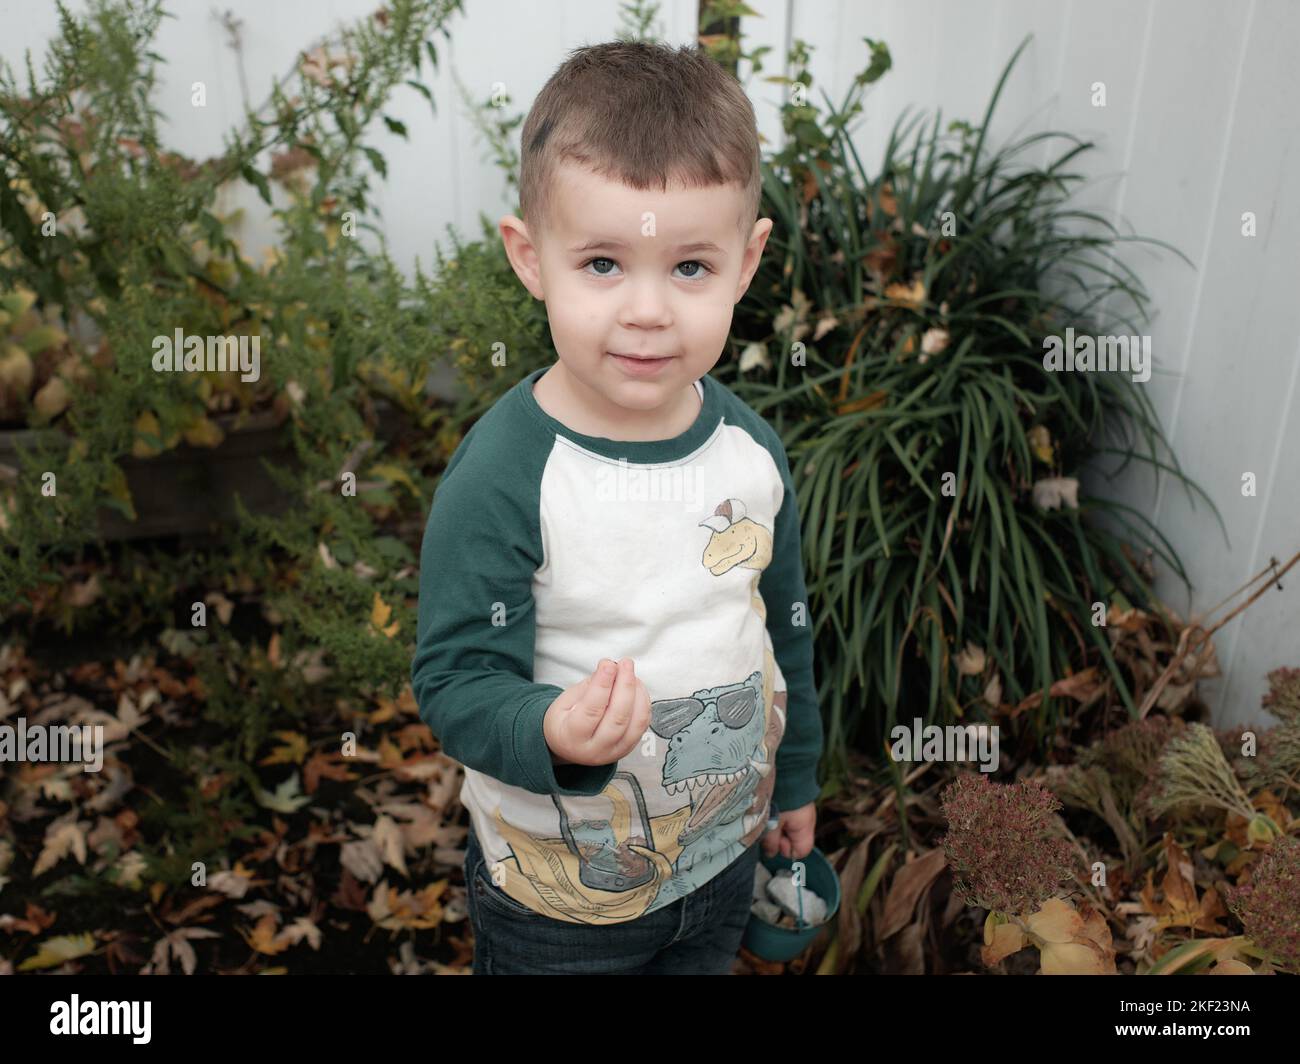 young boy playing in the backyard on a warm day in late autumn, posing among the plants Stock Photo